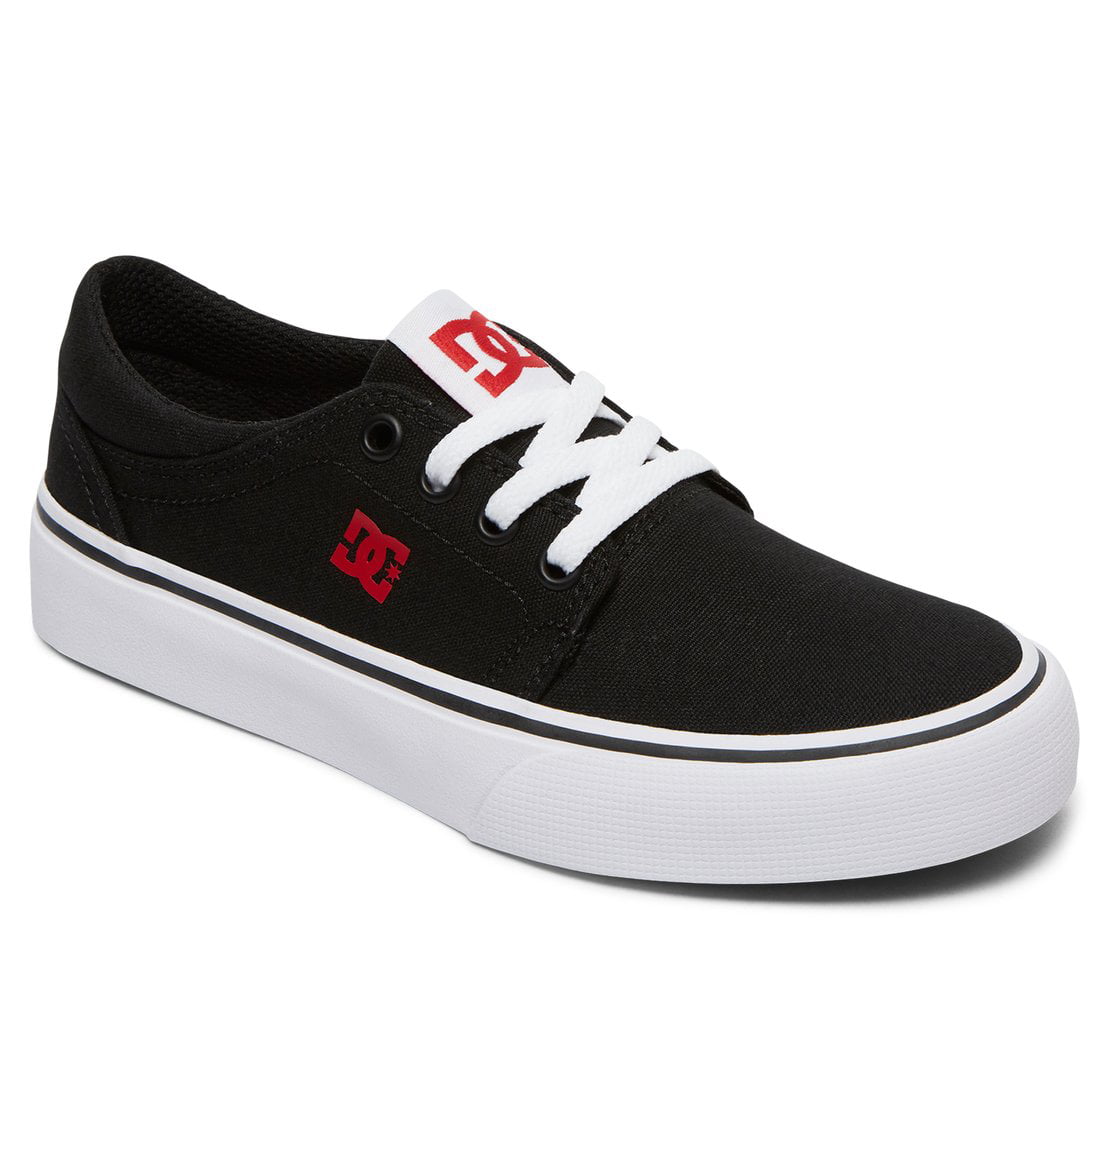 White Canvas Lace Up Casual Shoes DC Shoes Trase TX Grey Grey 